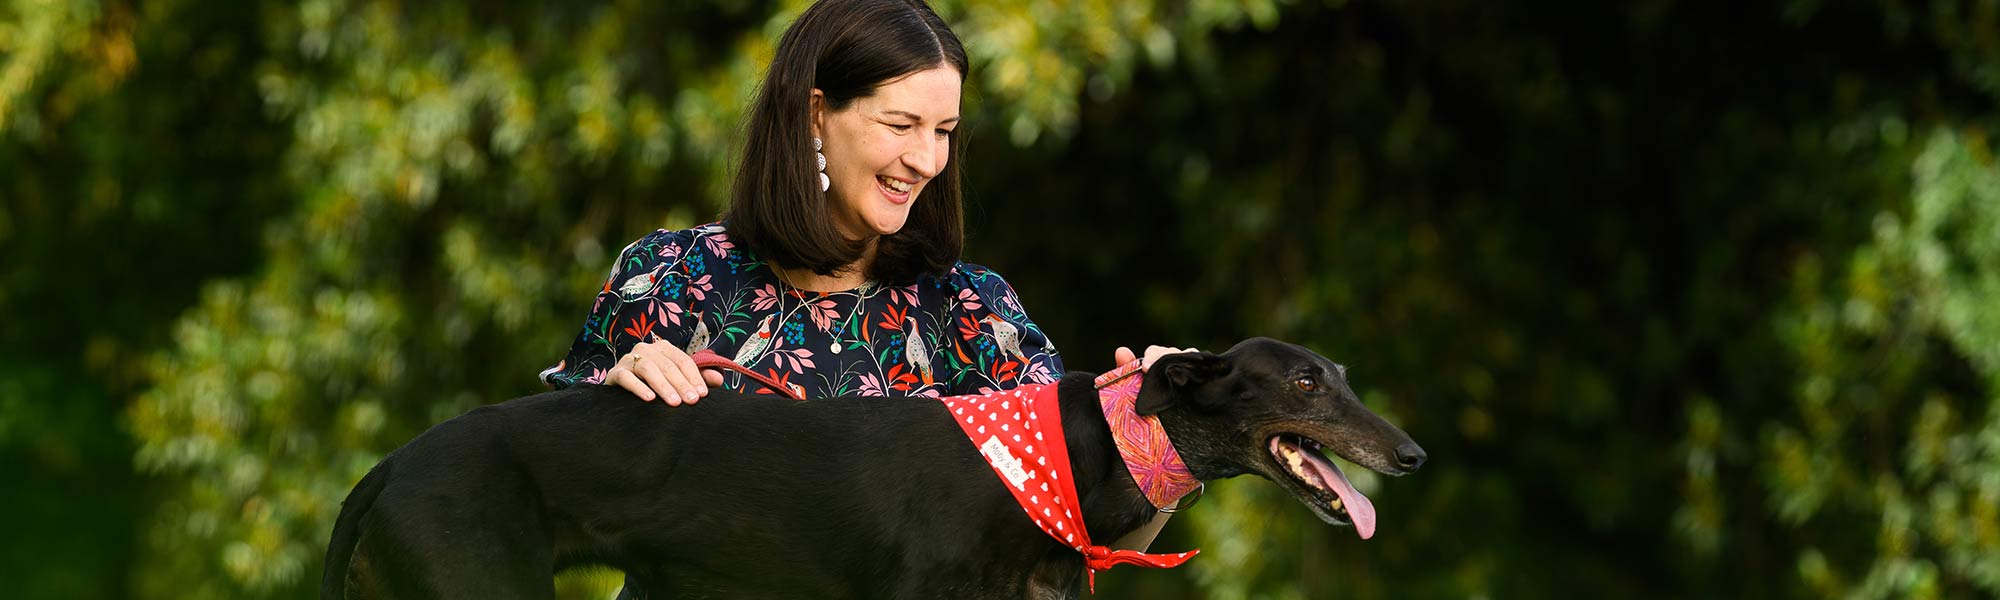 a woman patting a greyhound in a park